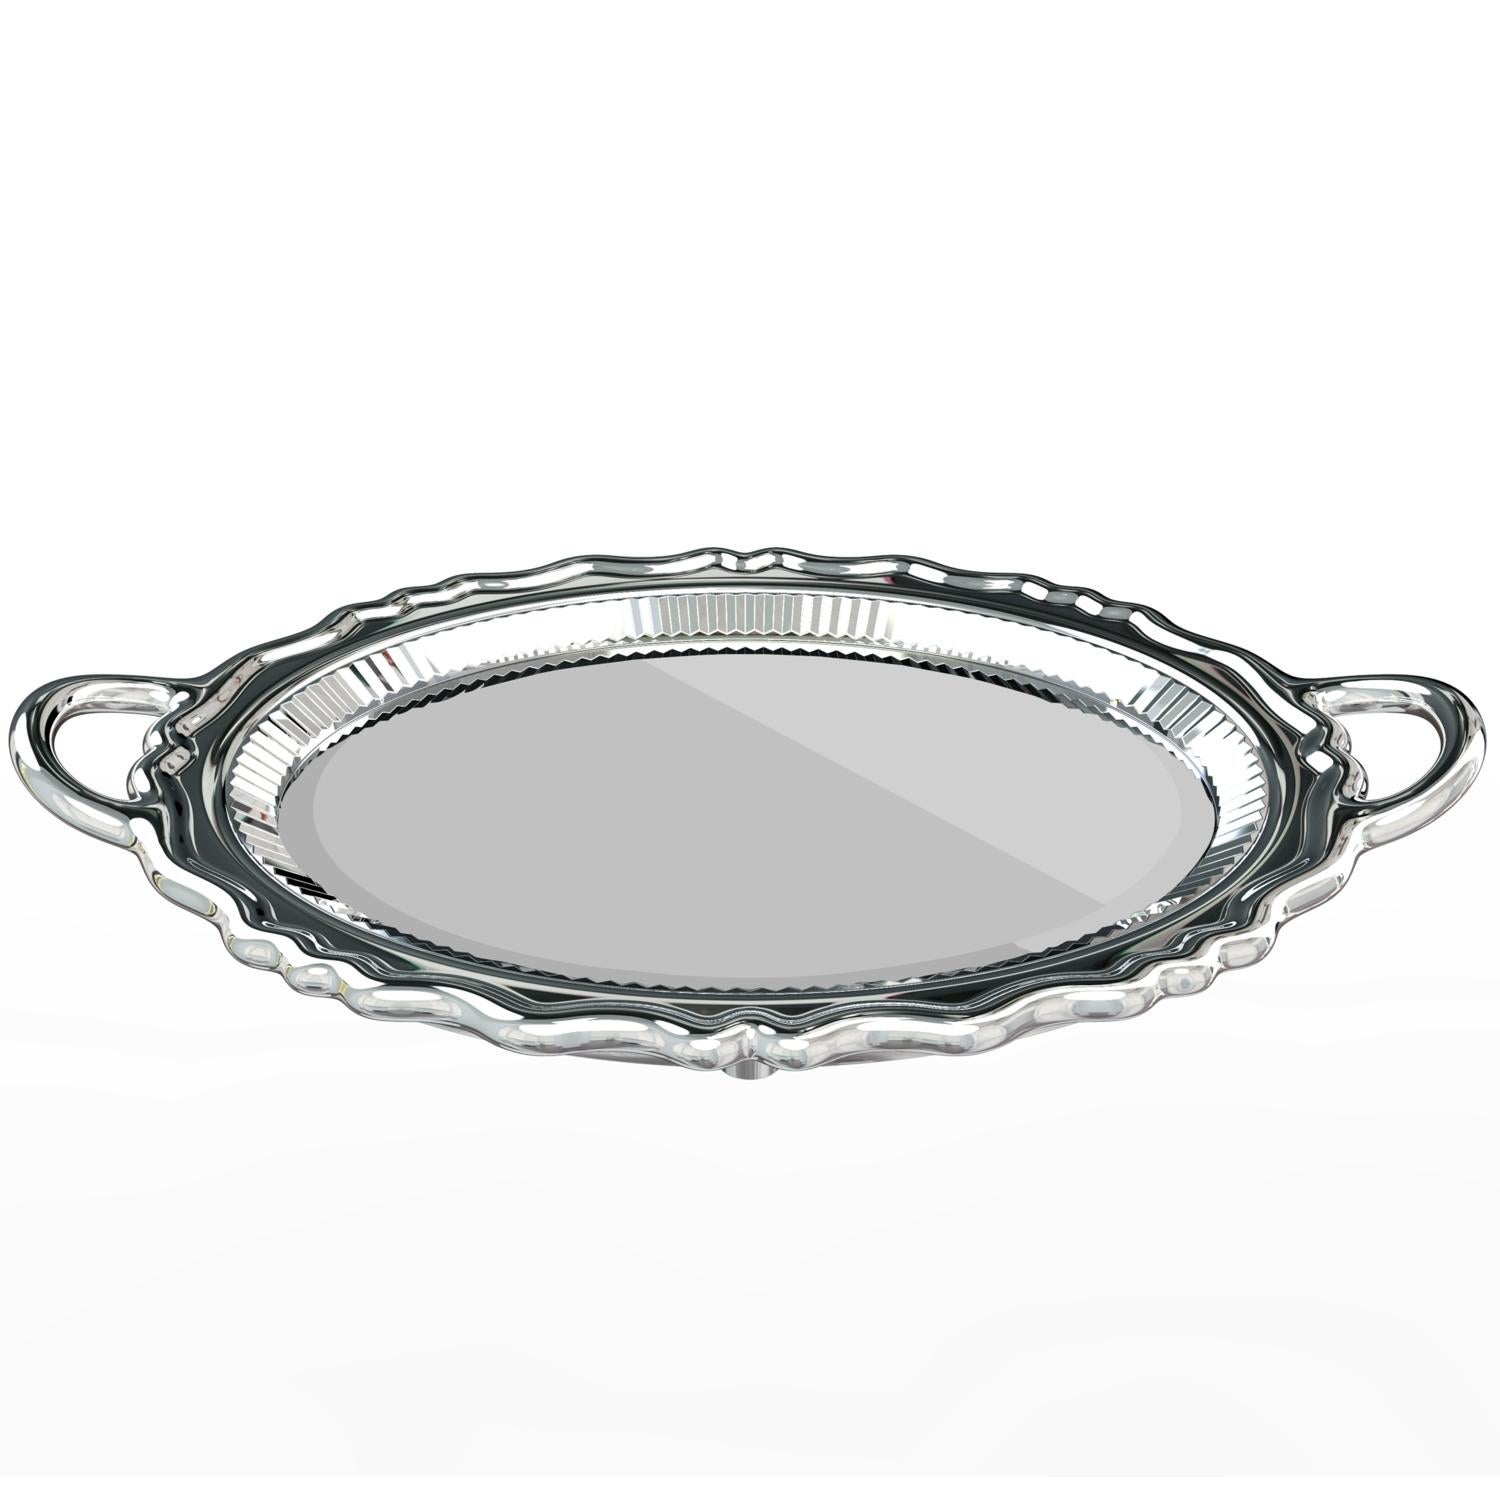 Contemporary Silver Metal Finish Plateau Mirror, Designed by Studio Job, Made in Italy For Sale